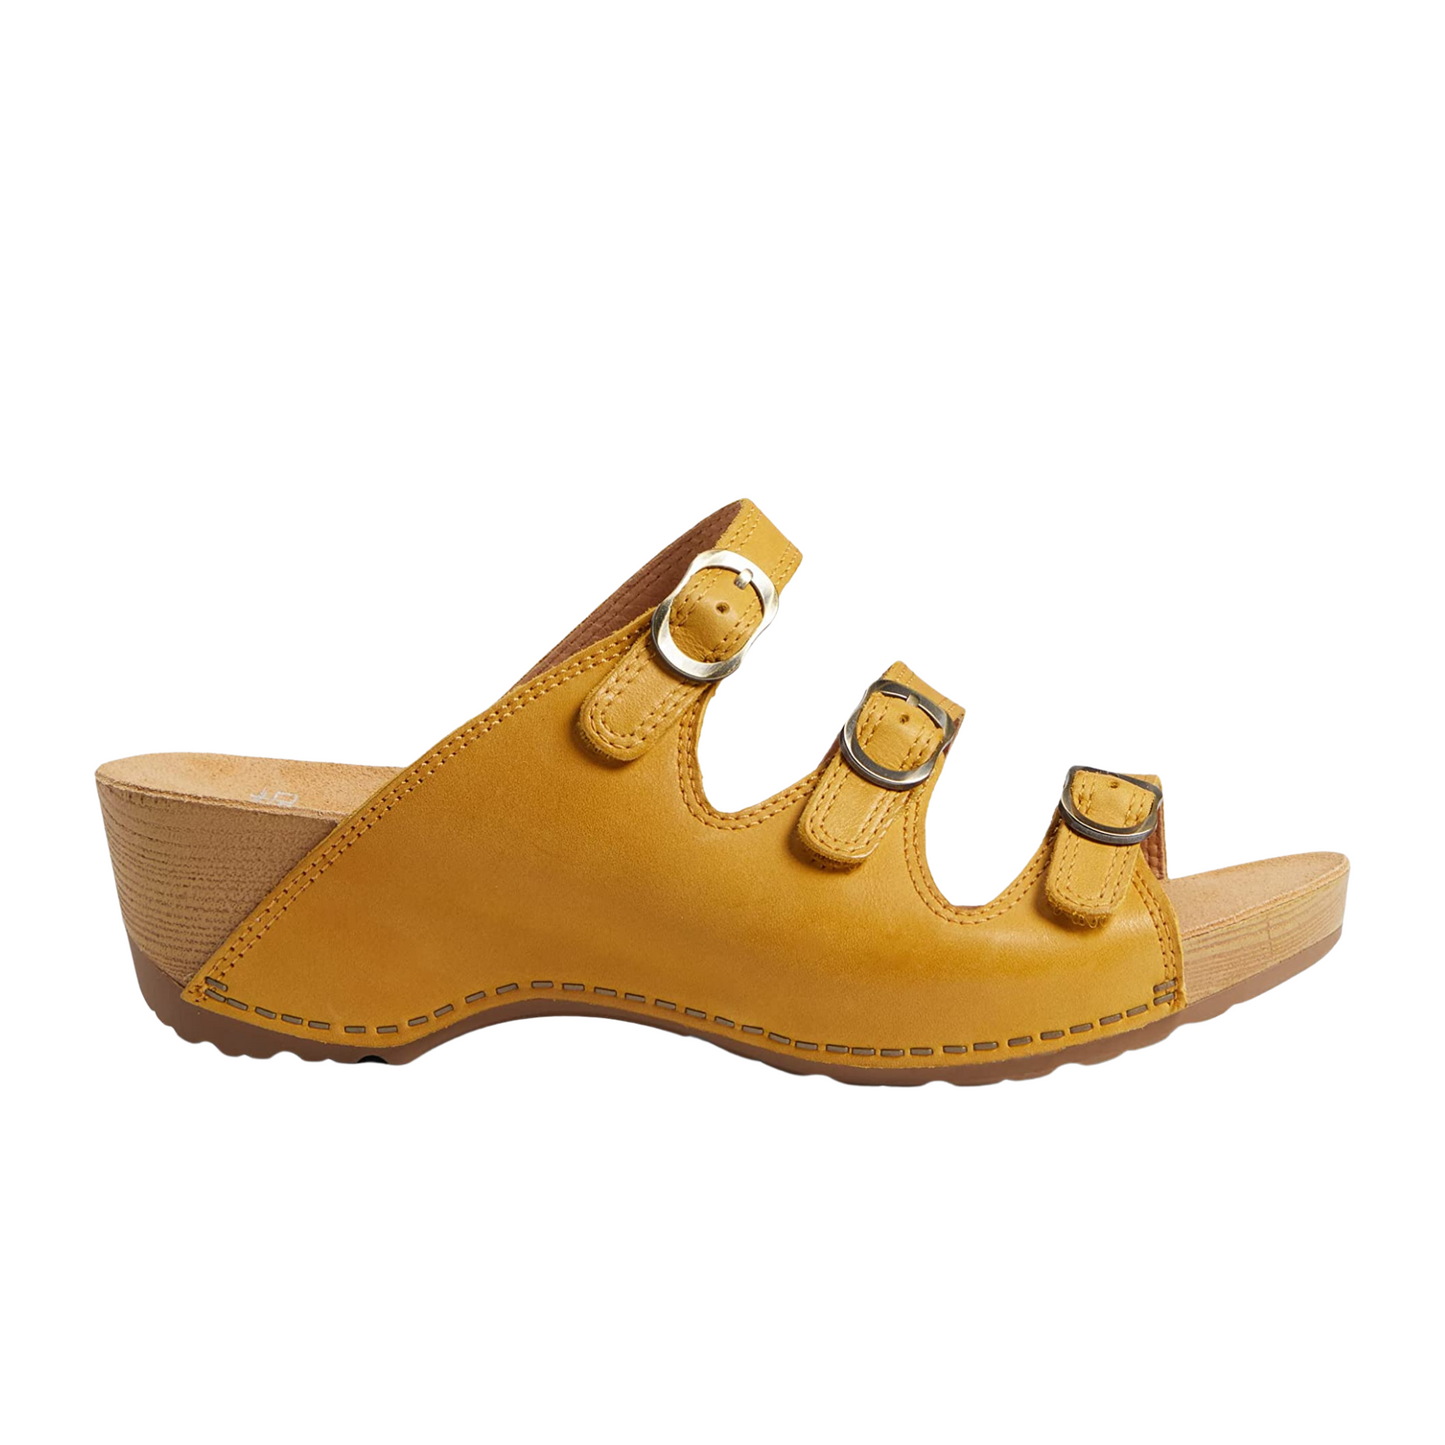 A right side view of a wedged sandal with three yellow leather straps.